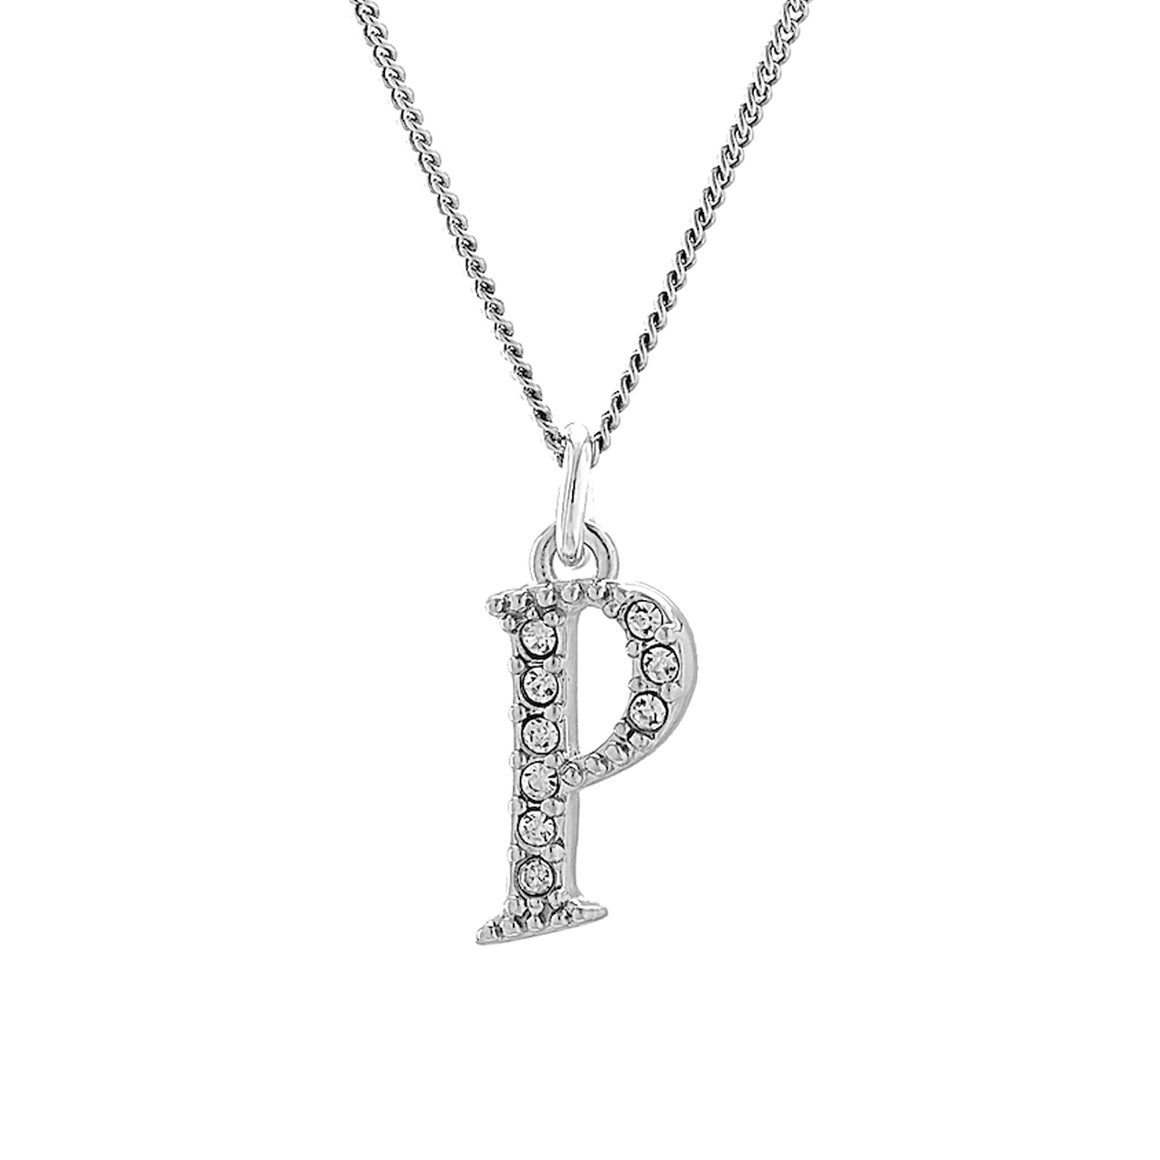 Cubic Zirconia Initial Pendant with 18" Chain - "P"